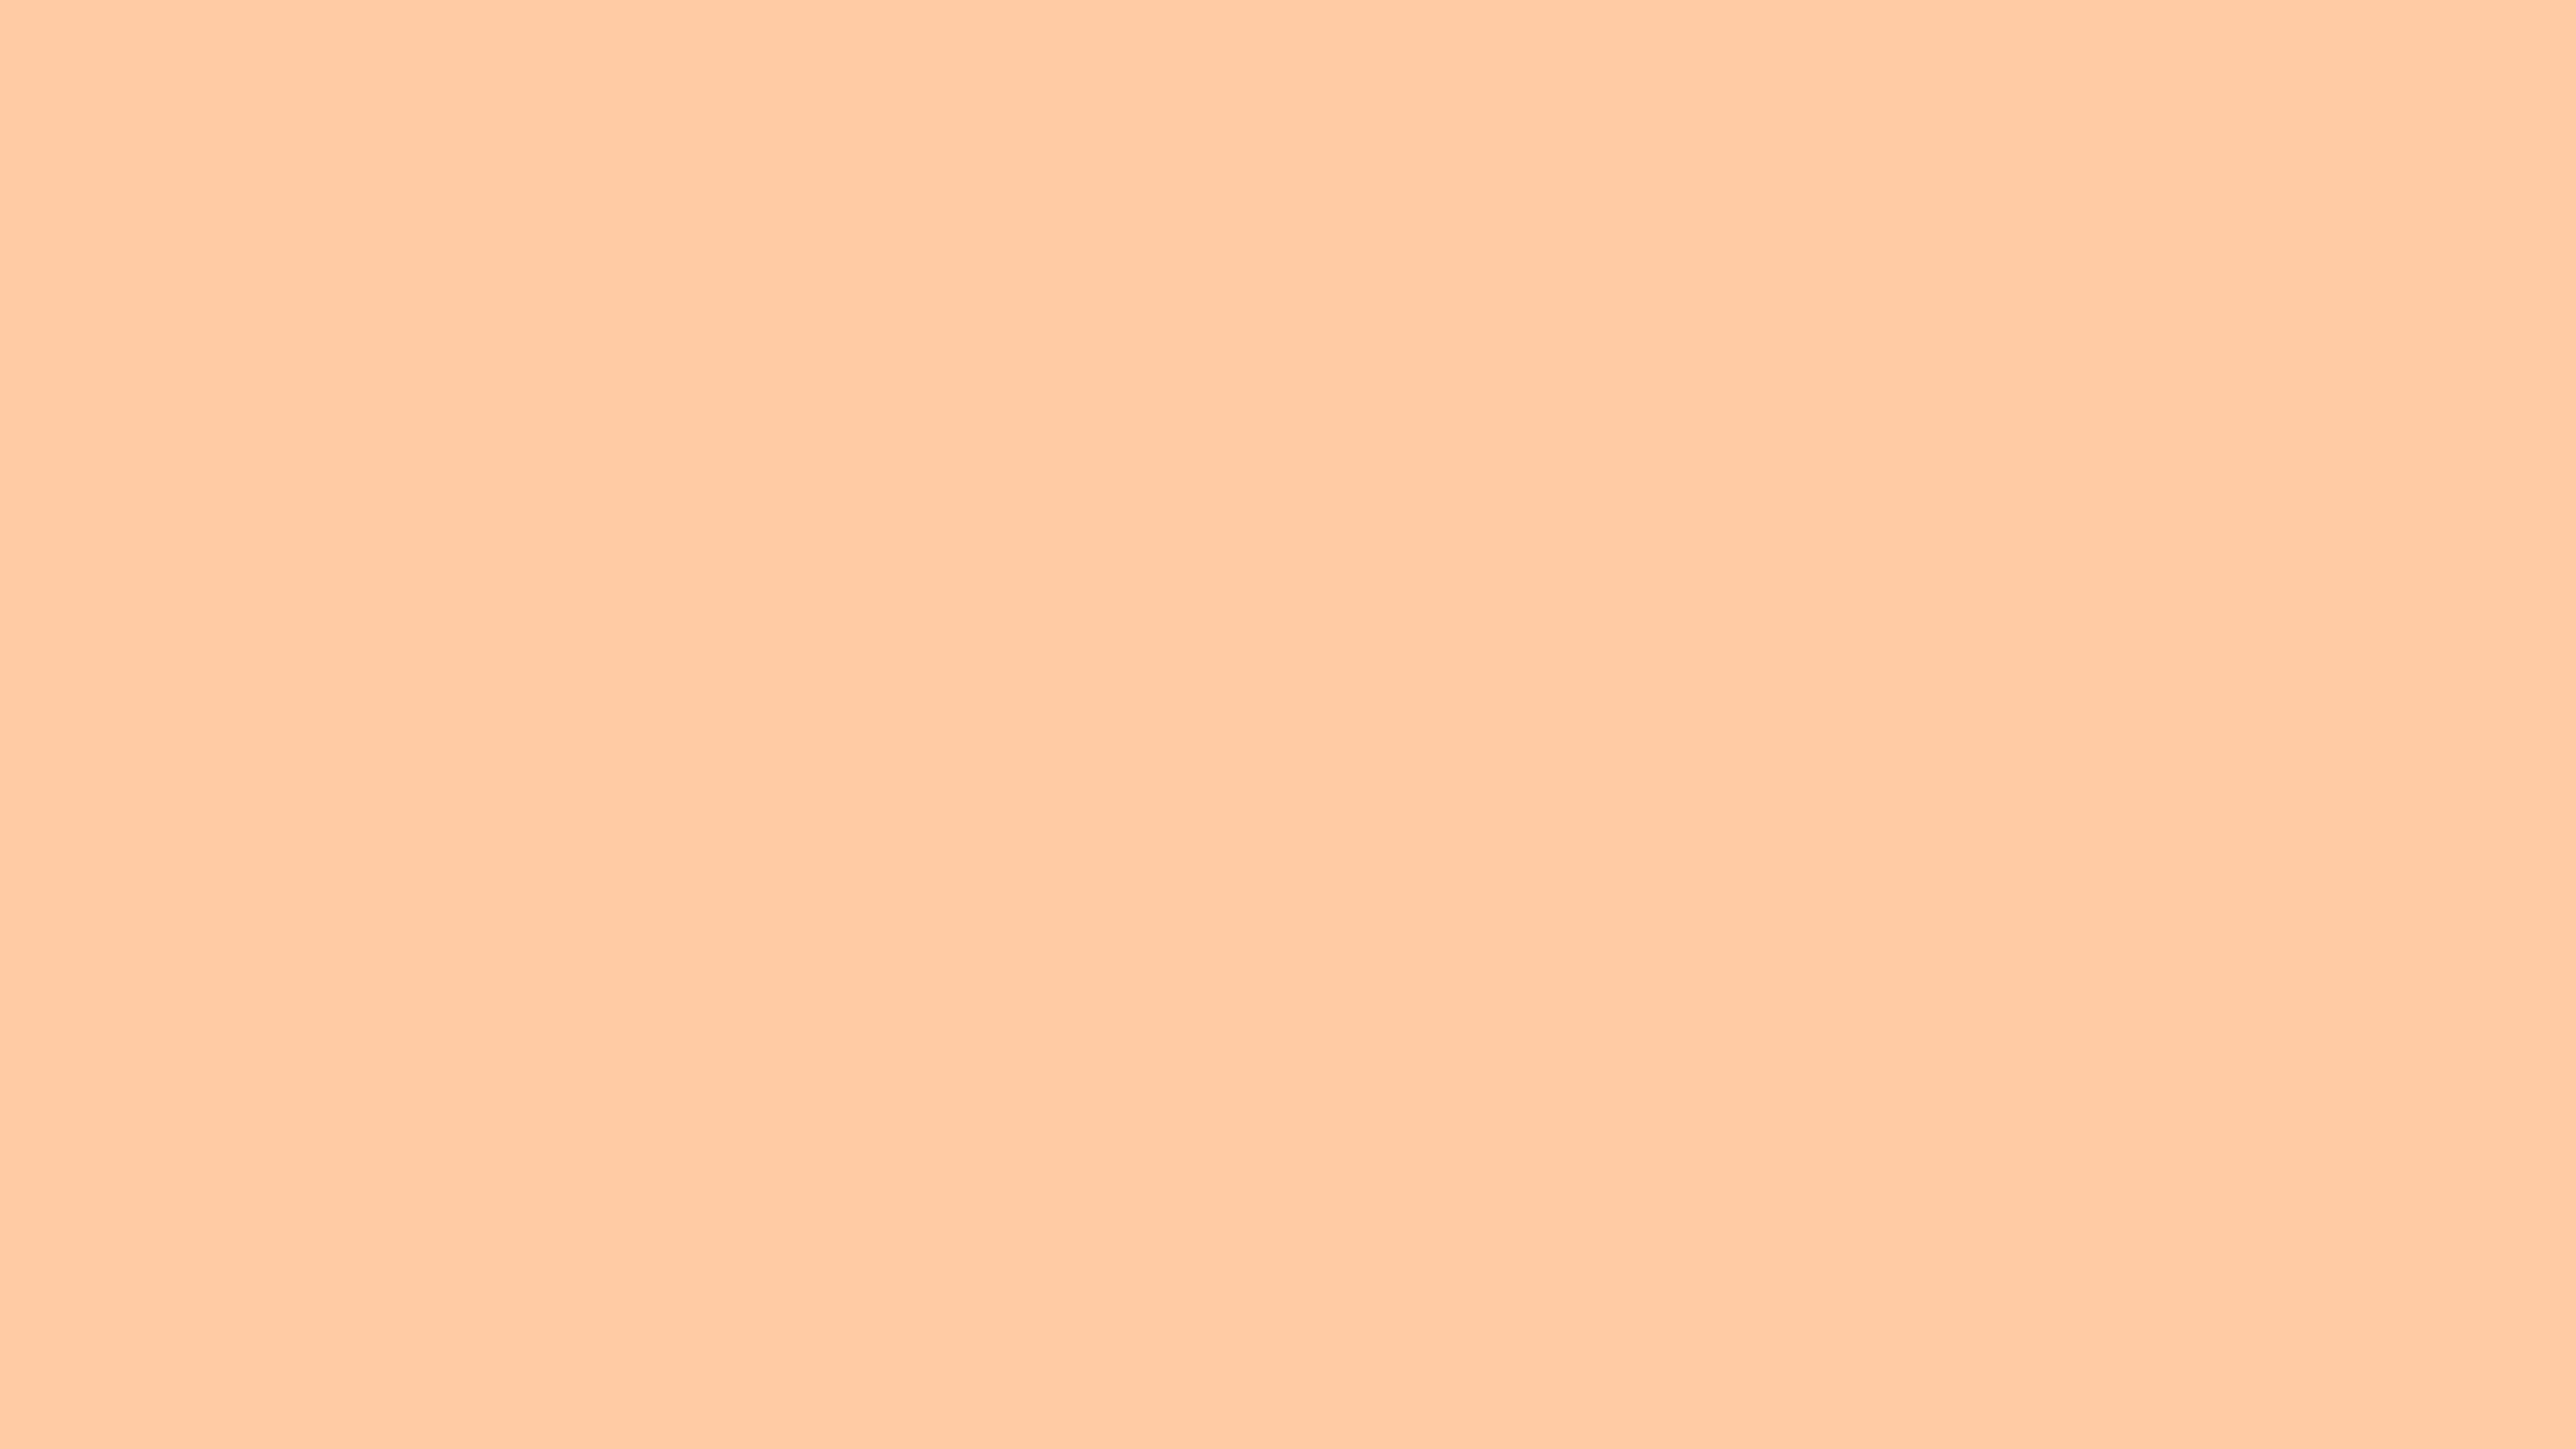 Deep Peach Solid Color Background Wallpaper [5120x2880]